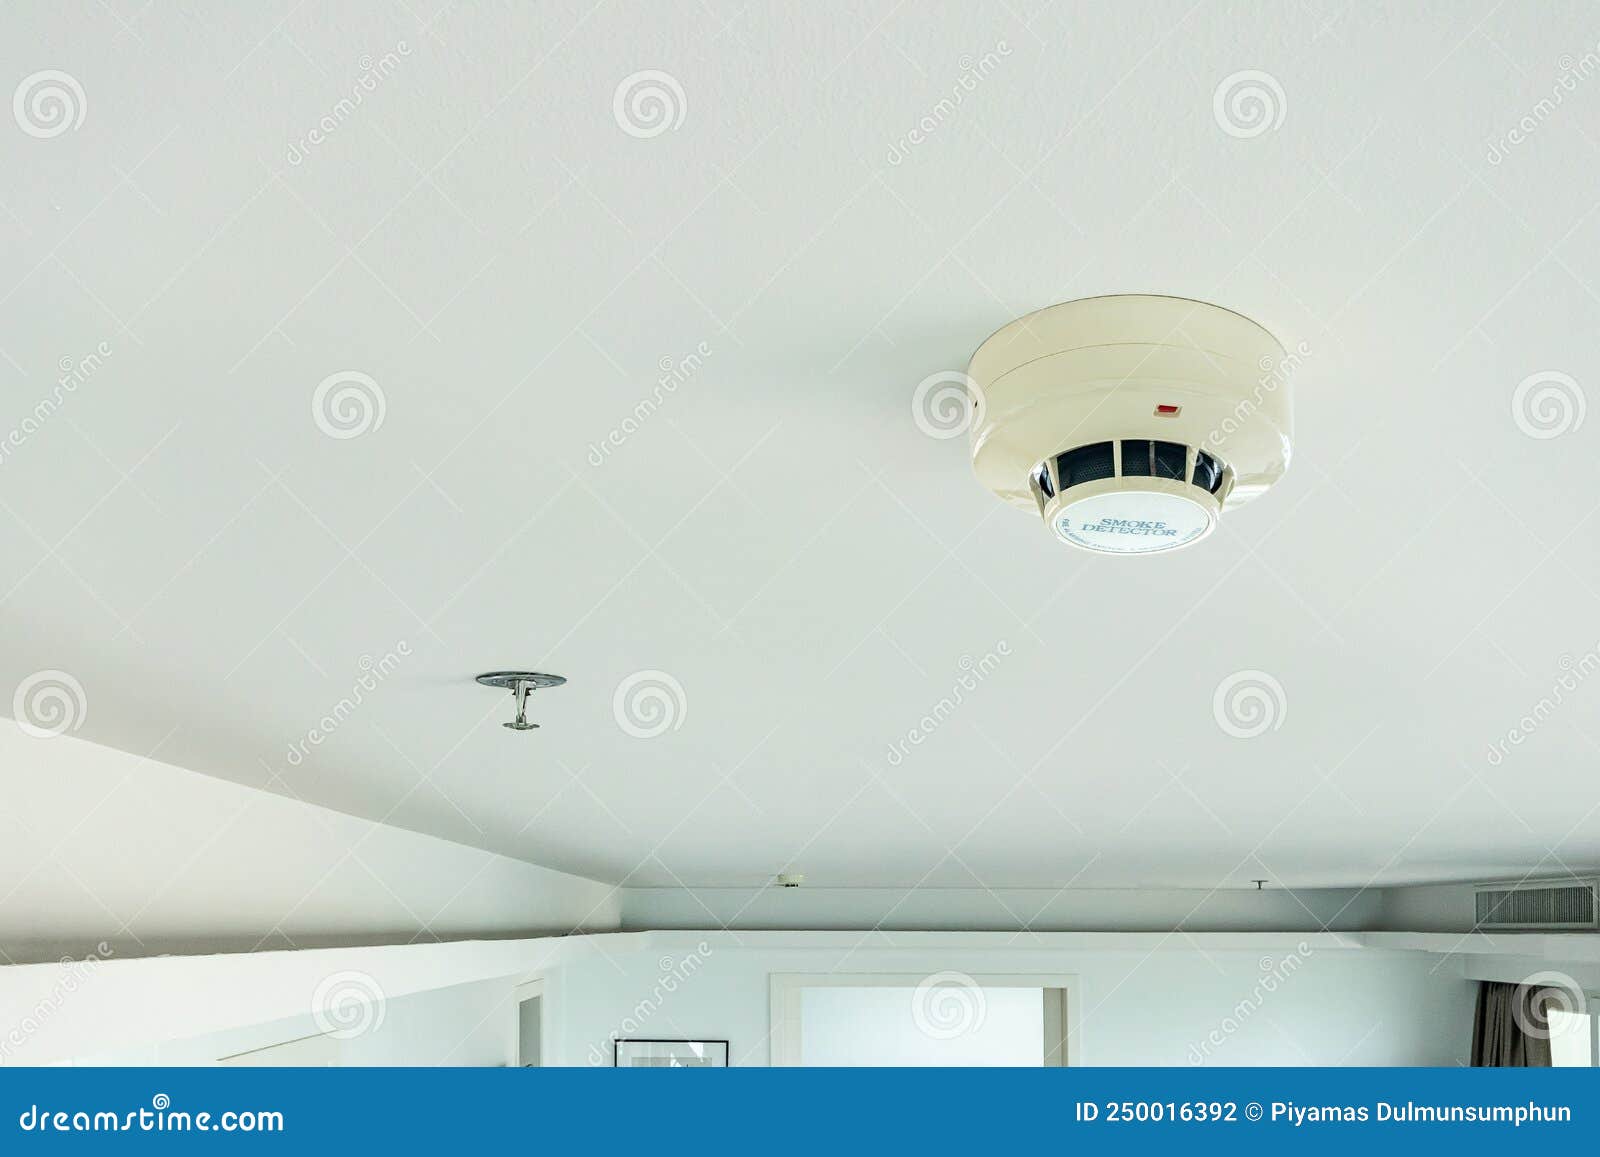 smoke detector and fire sprinkler on ceiling, fire alarming system and security system at home property for safety domestic life.